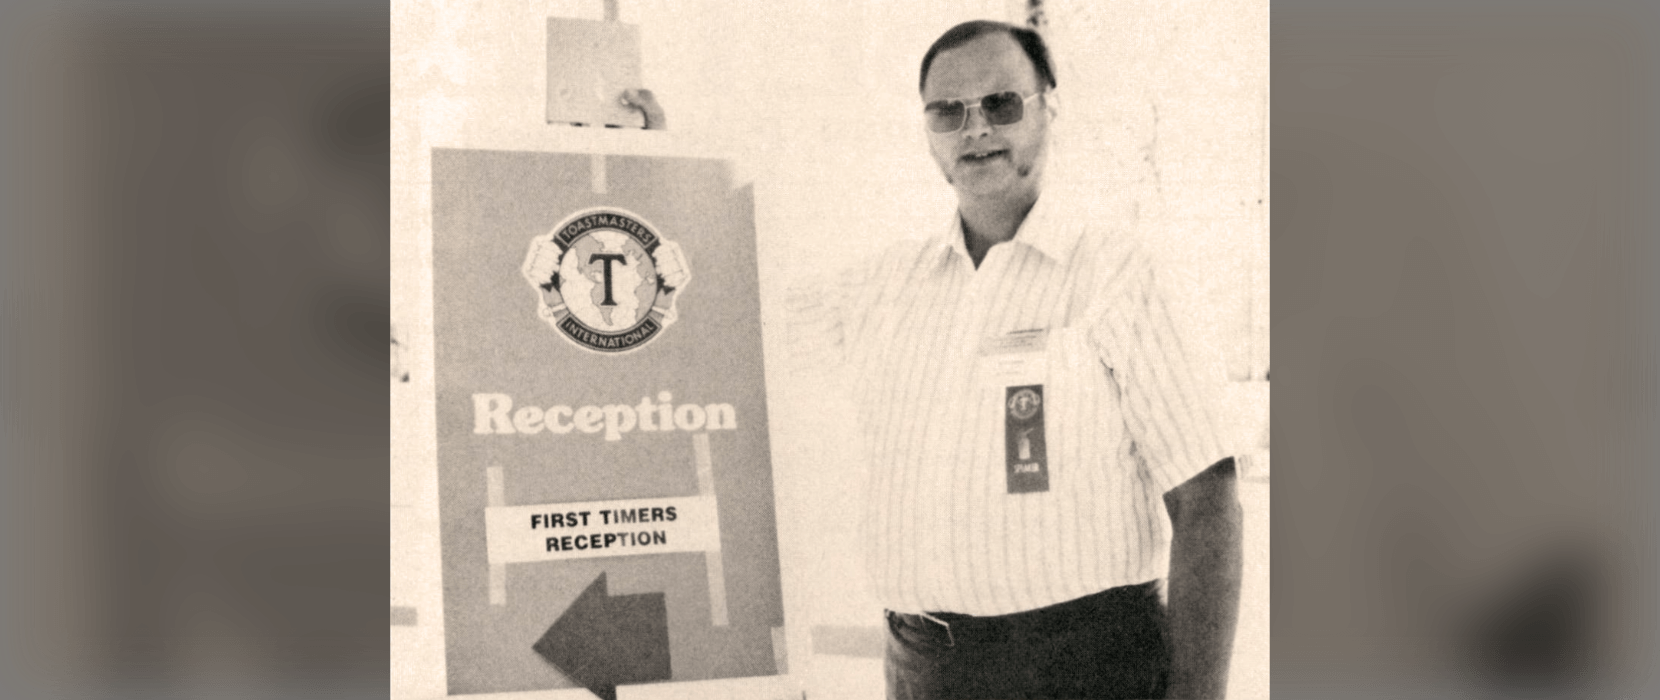 Black and white photo of a man standing next to a sign